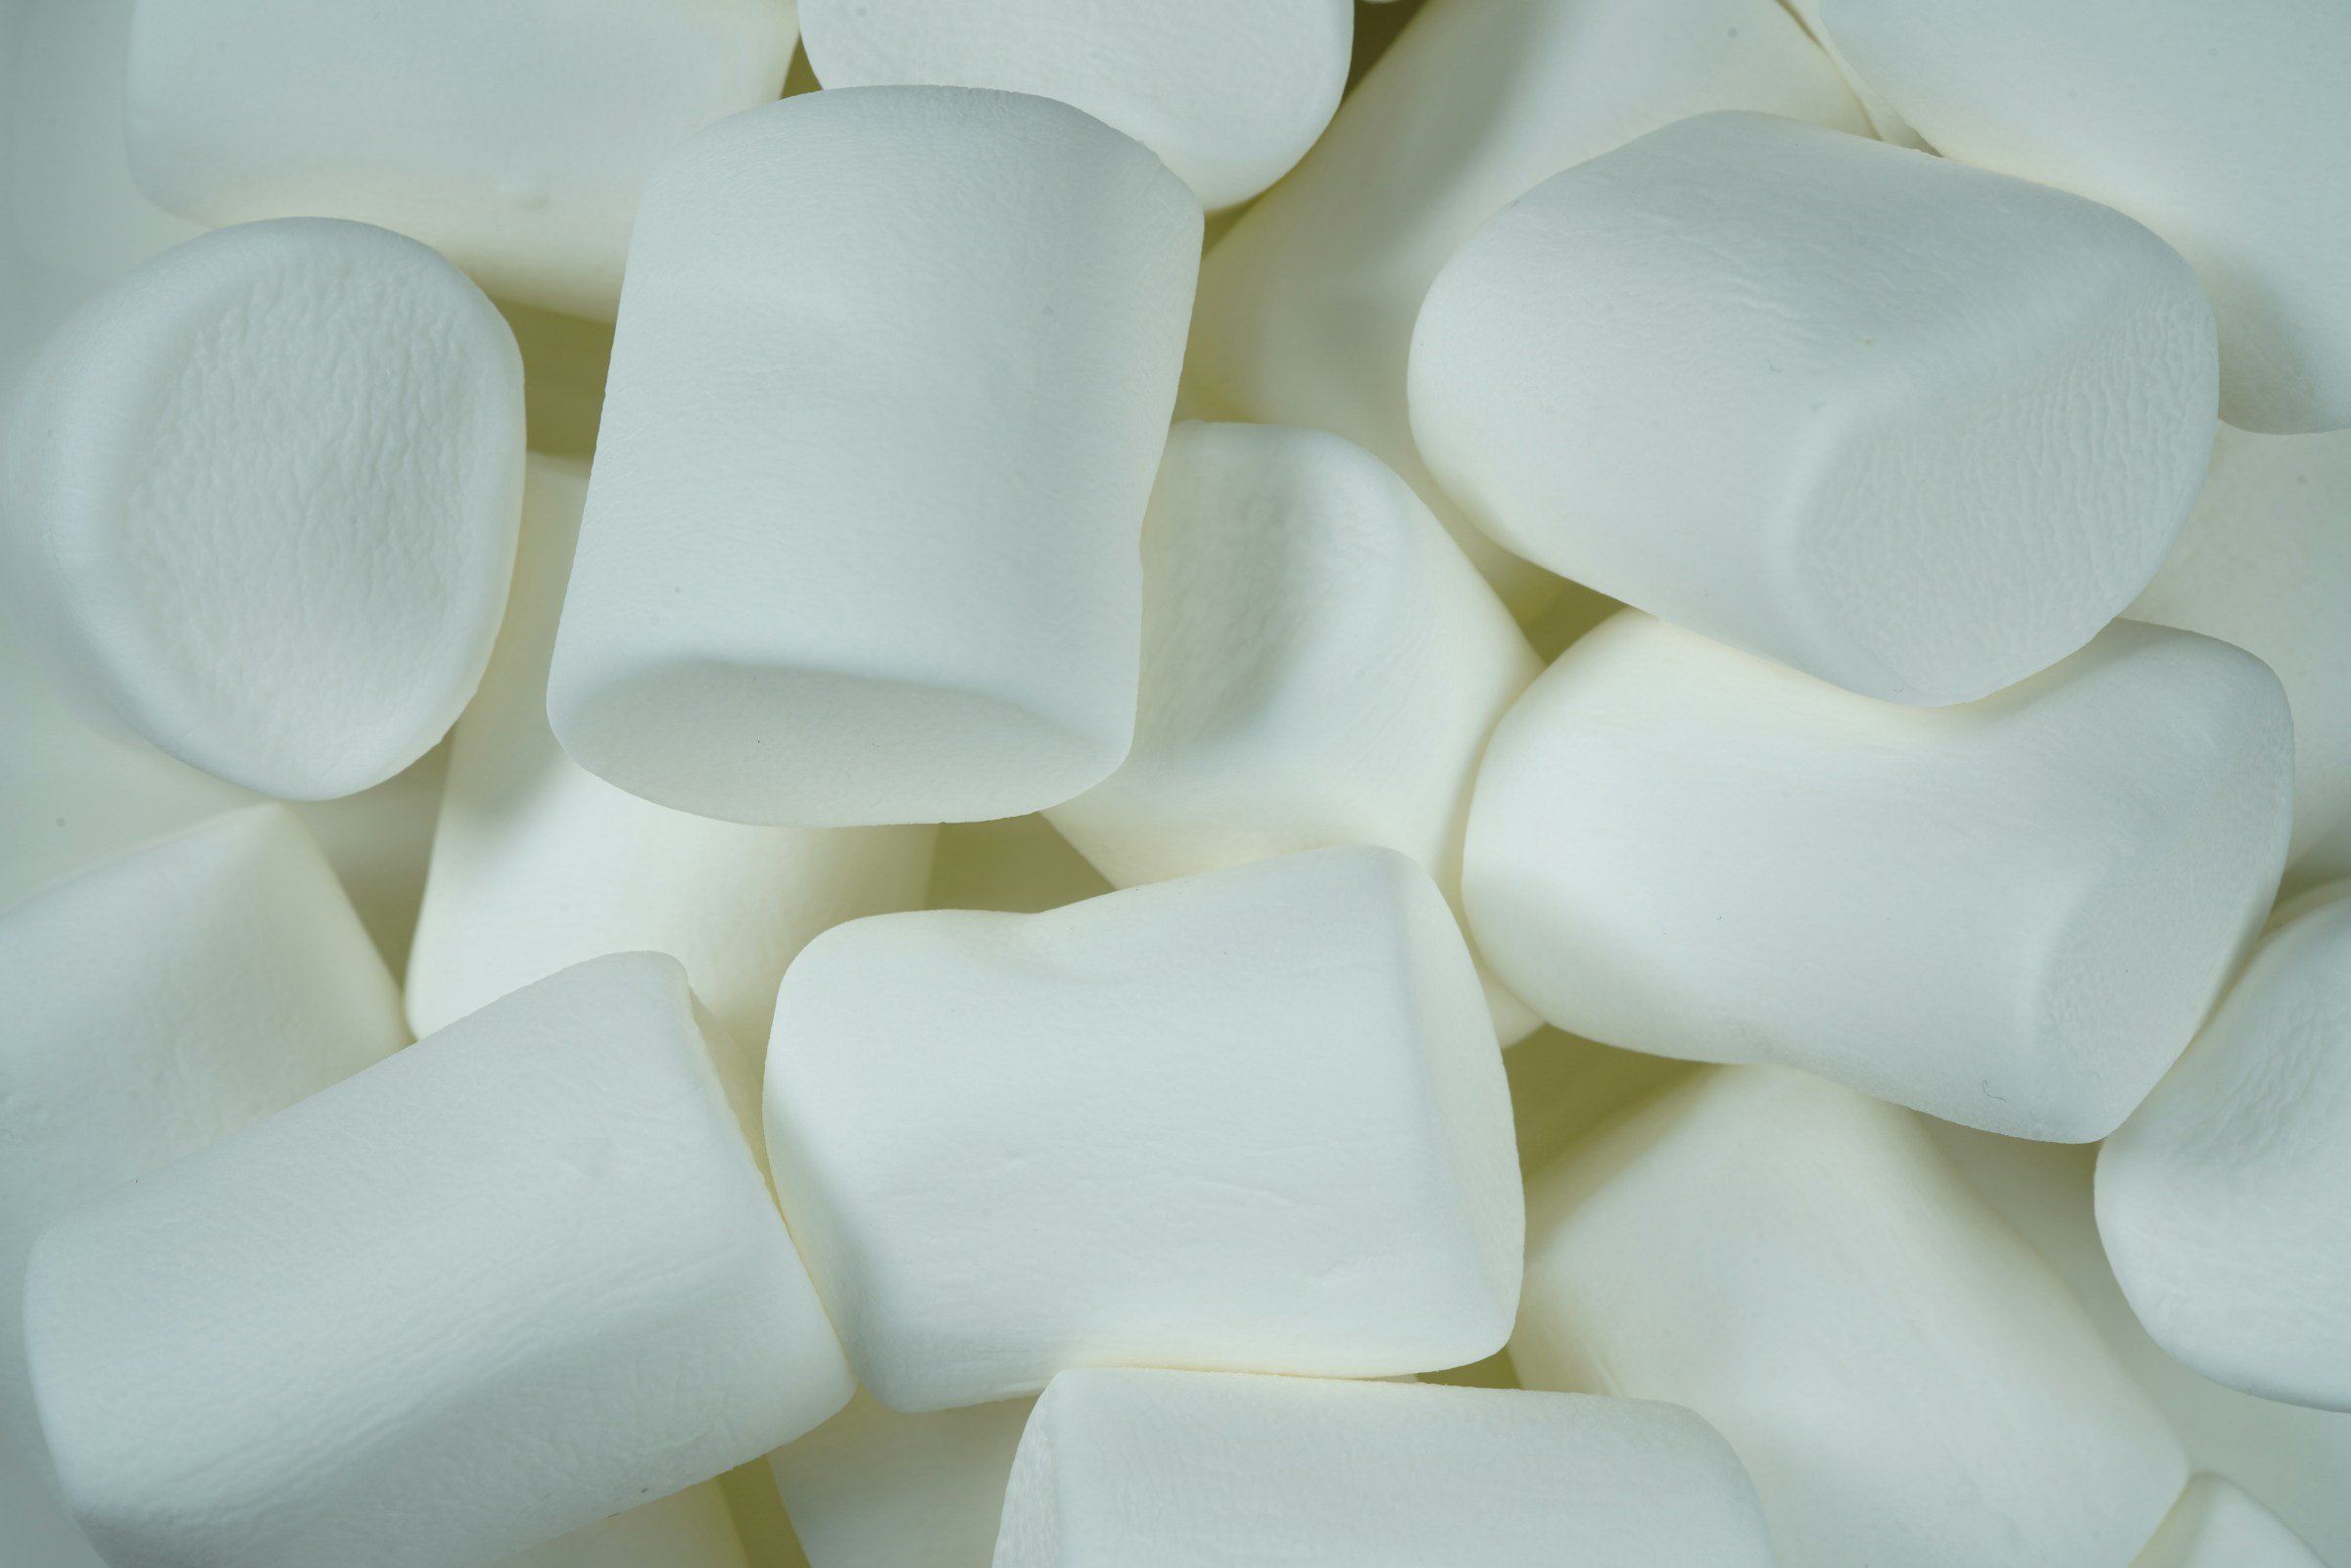 A pile of marshmallows | Source: Unsplash